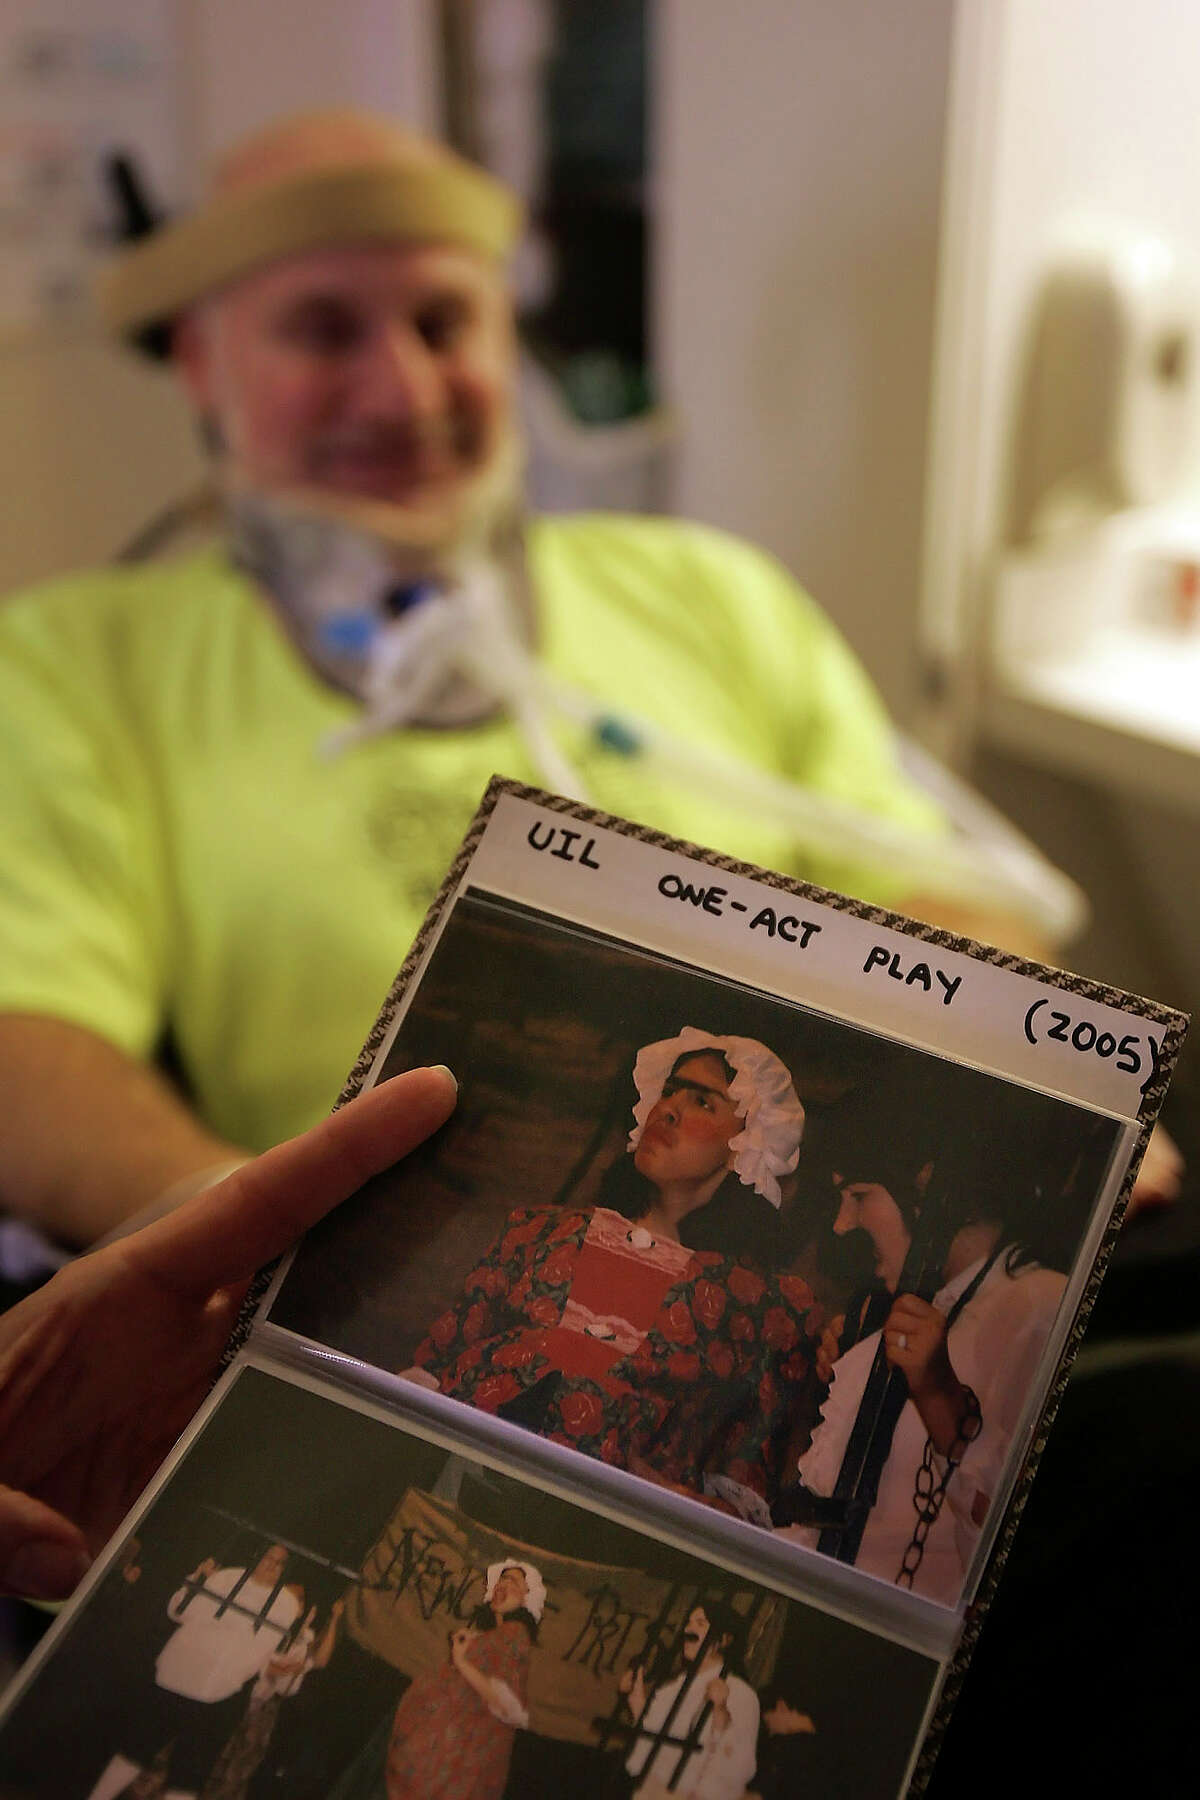 Robert Rehm's sister Janice Walker holds a photo album Wednesday Aug. 17, 2005 in Houston at The Institute of Rehabilitation and Research showing pictures from the play Rehm, background, was working one when he had his accident. (WILLIAM LUTHER/STAFF)